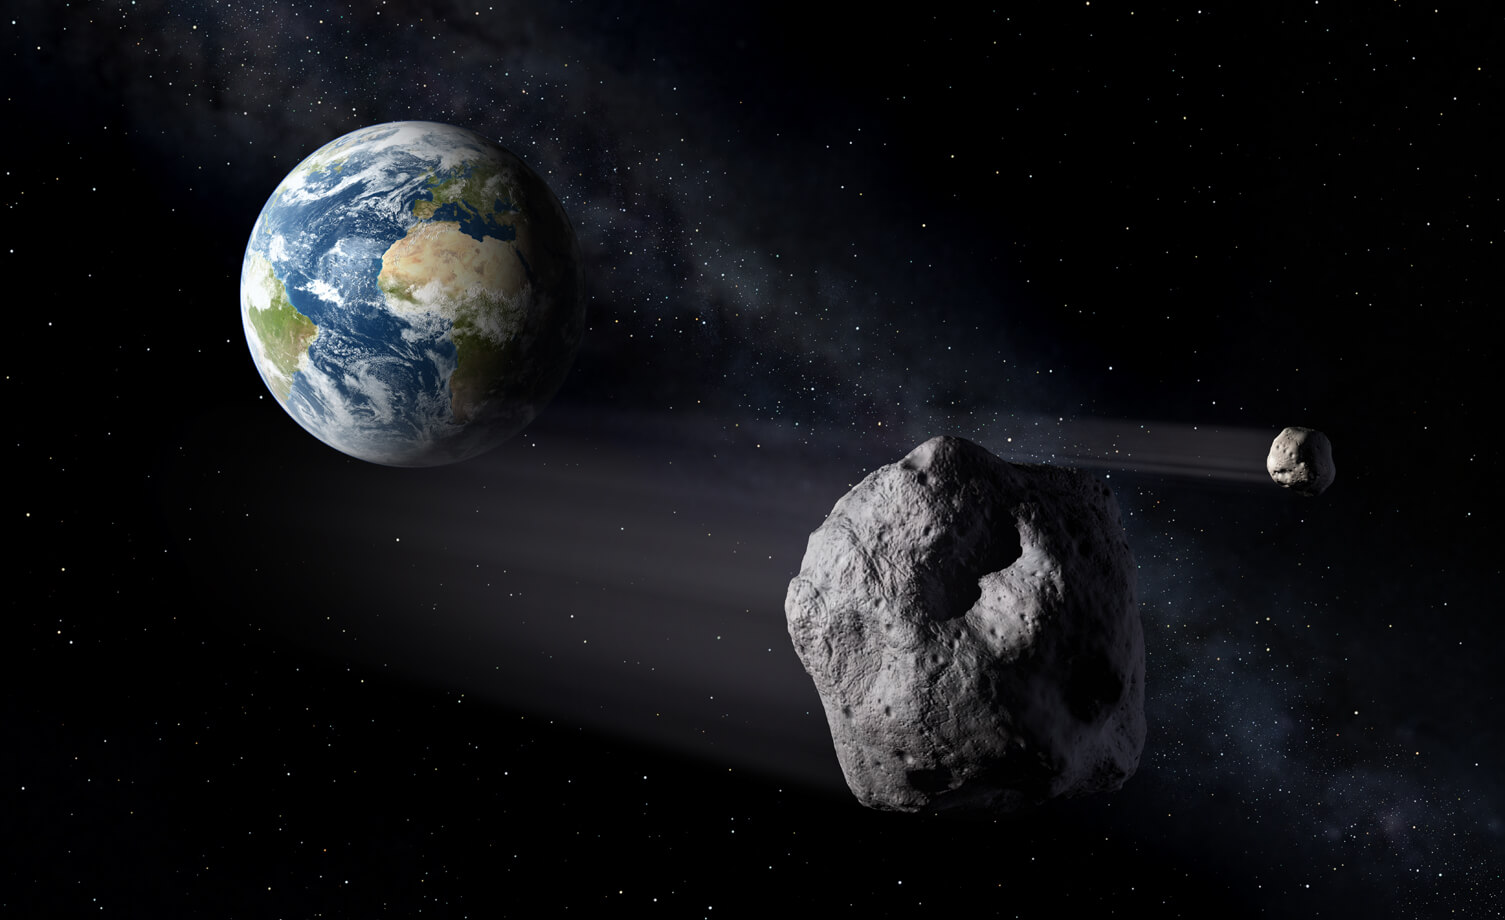 Asteroids pass by the Earth. Image: NASA